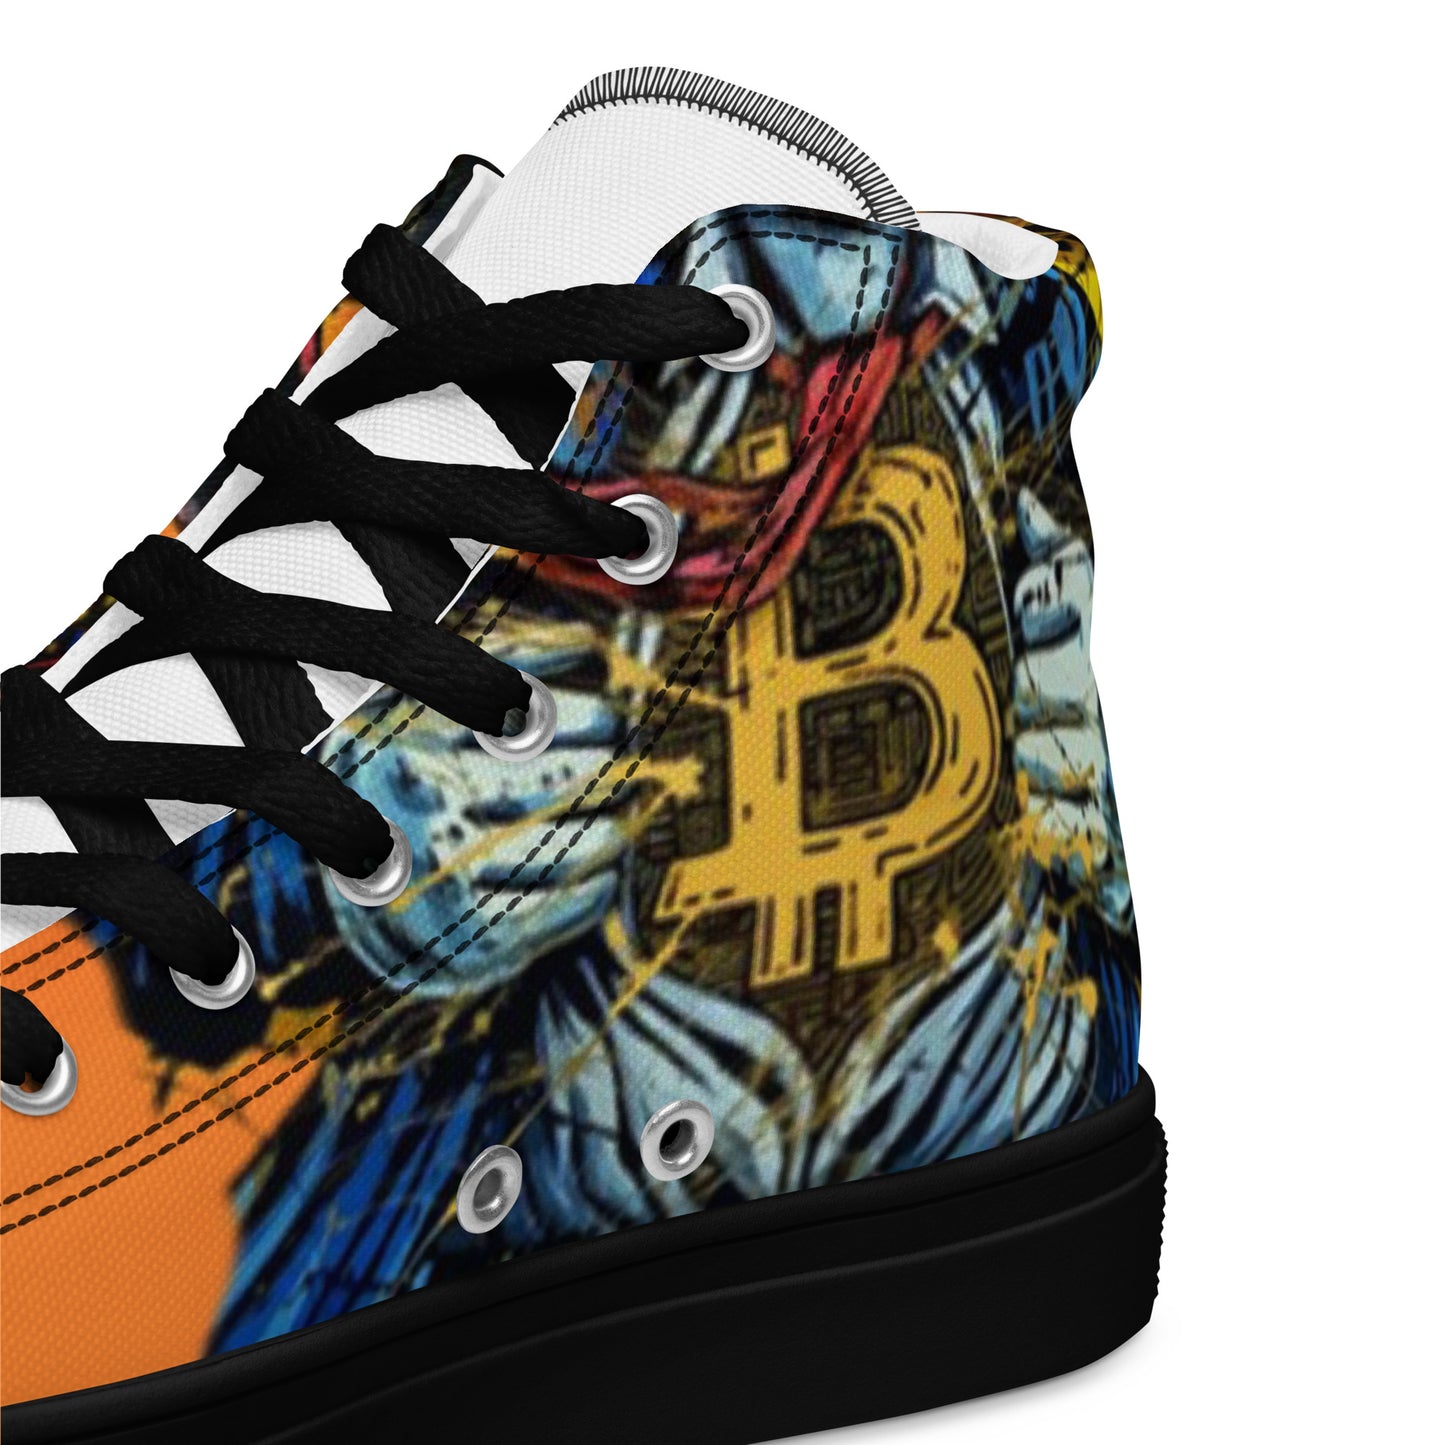 Bitcoin Sneakers Special Edition Rich Duck